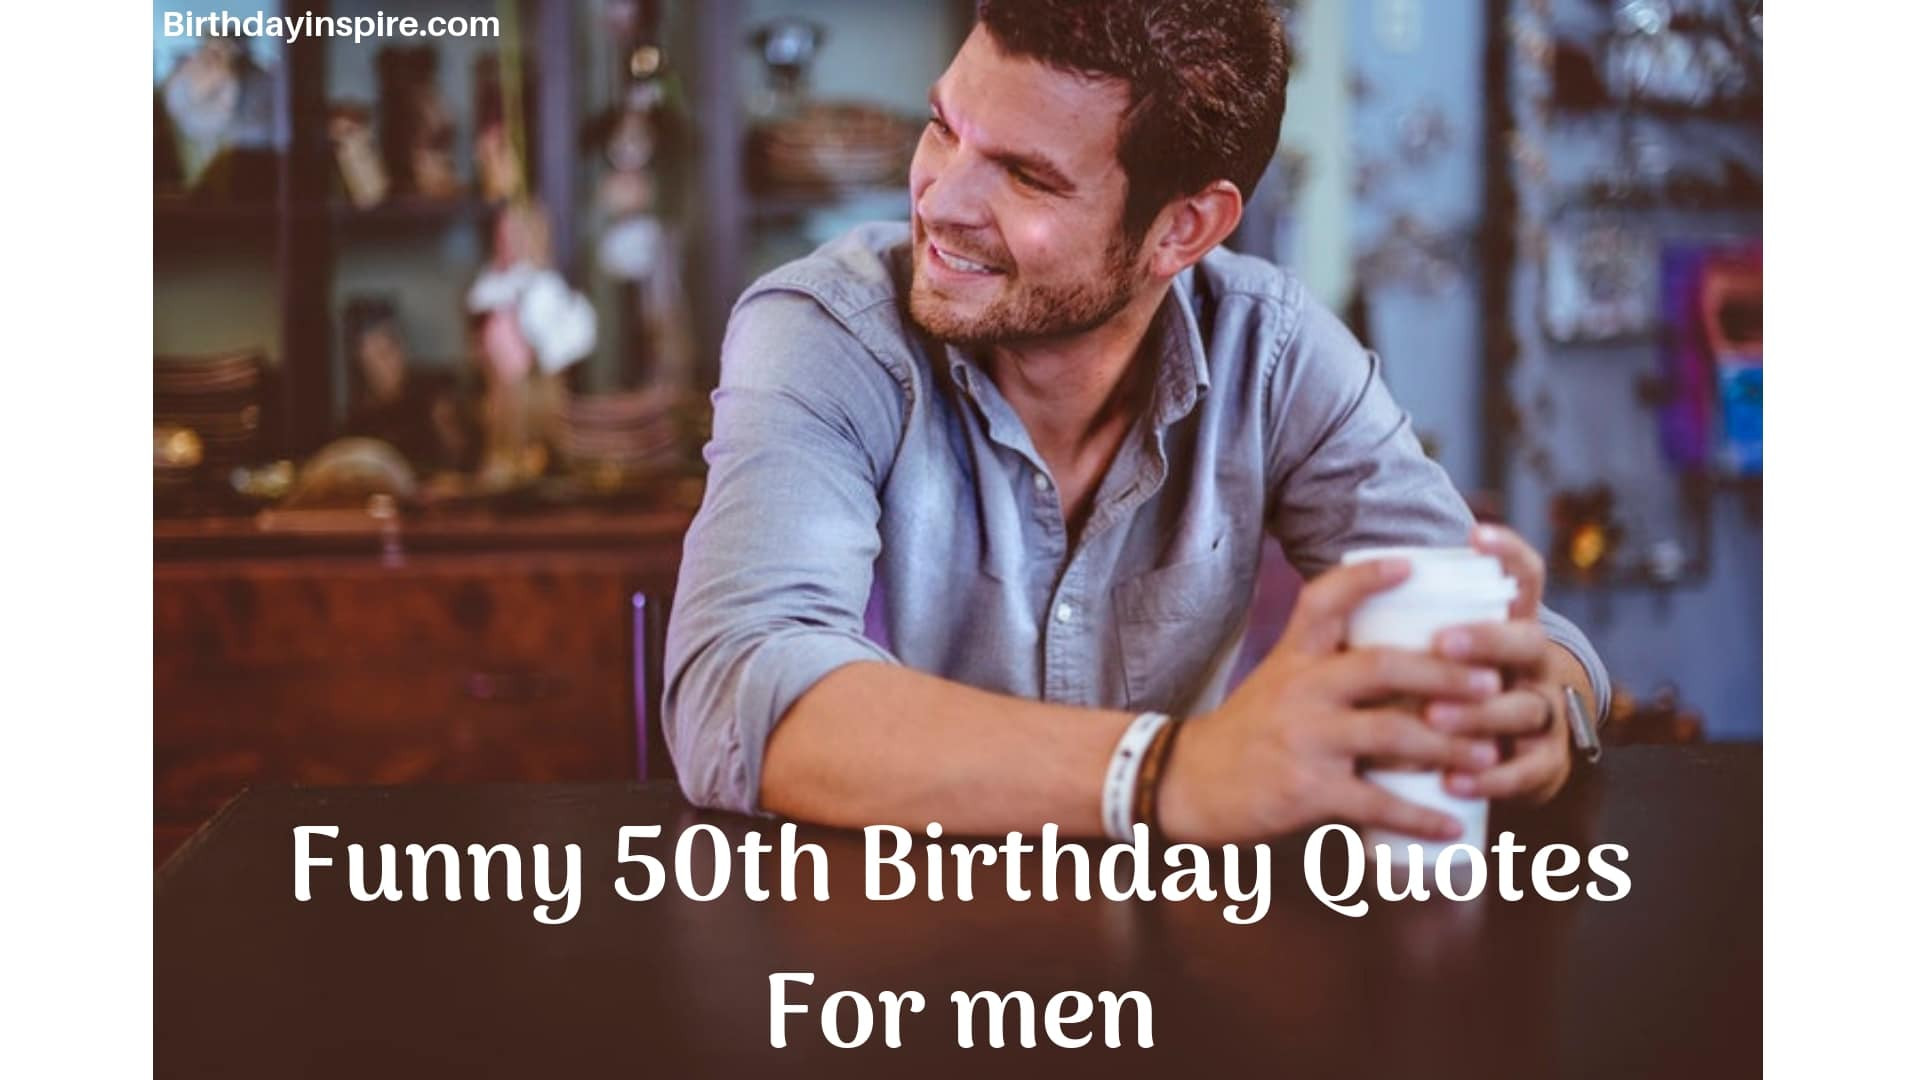 Funny 50th Birthday Wishes
 45 Hilarious 50th Birthday Quotes For Men Birthday Inspire